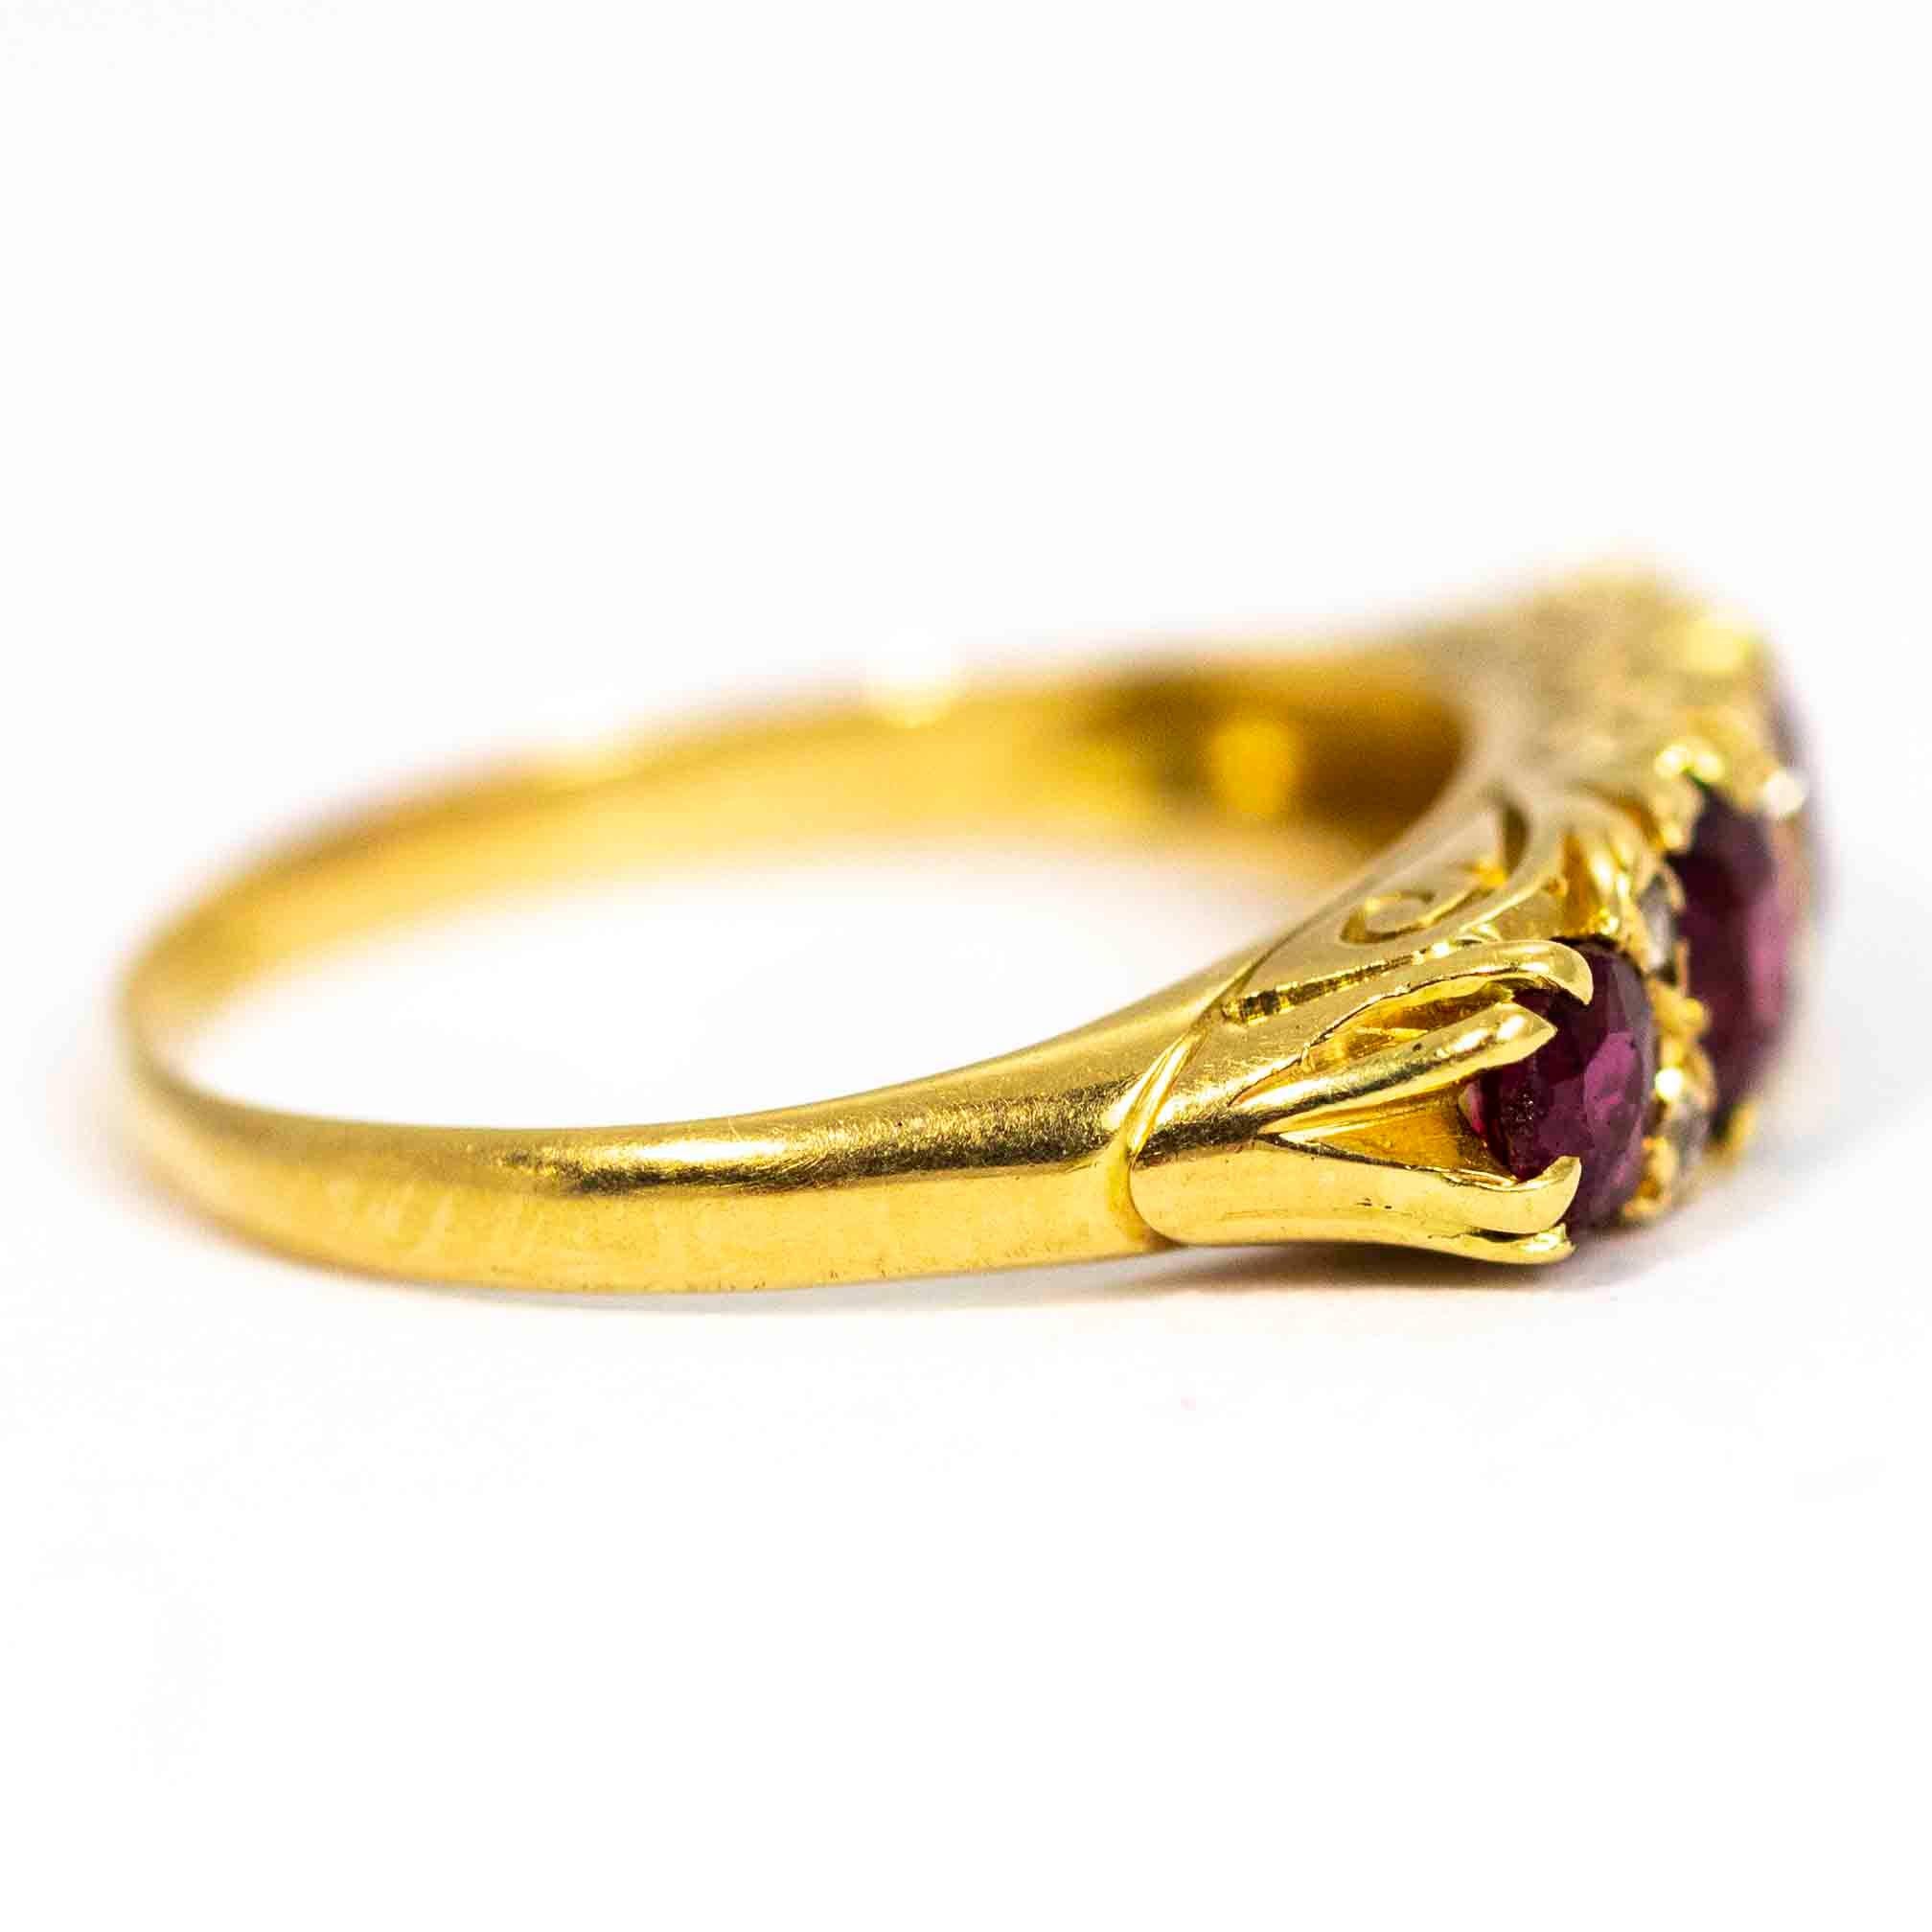 Cushion Cut Victorian 18 Carat Gold Ruby Four-Stone Ring with Diamond Points